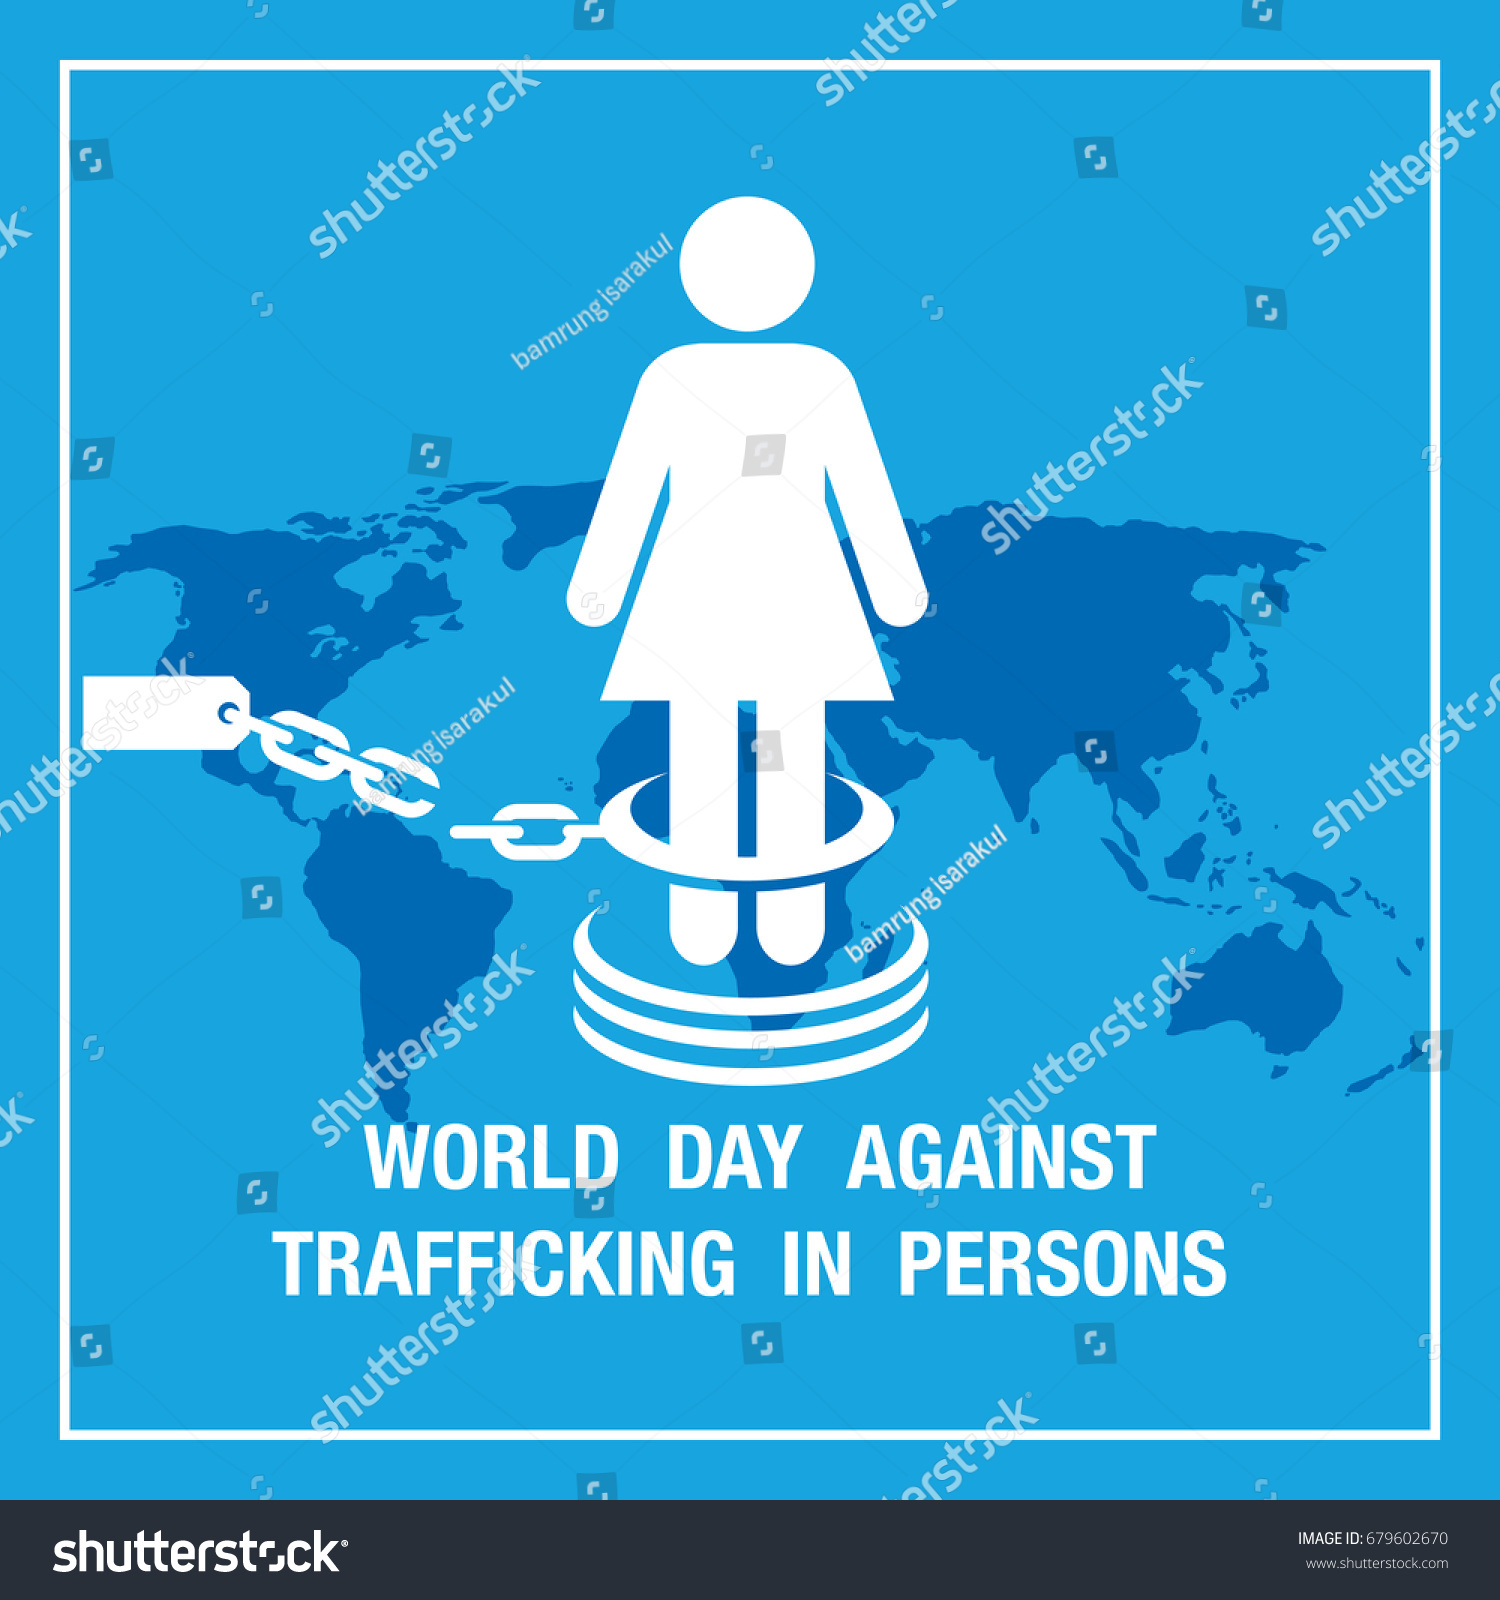 World Day Against Trafficking Persons Banner Stock Vector Royalty Free